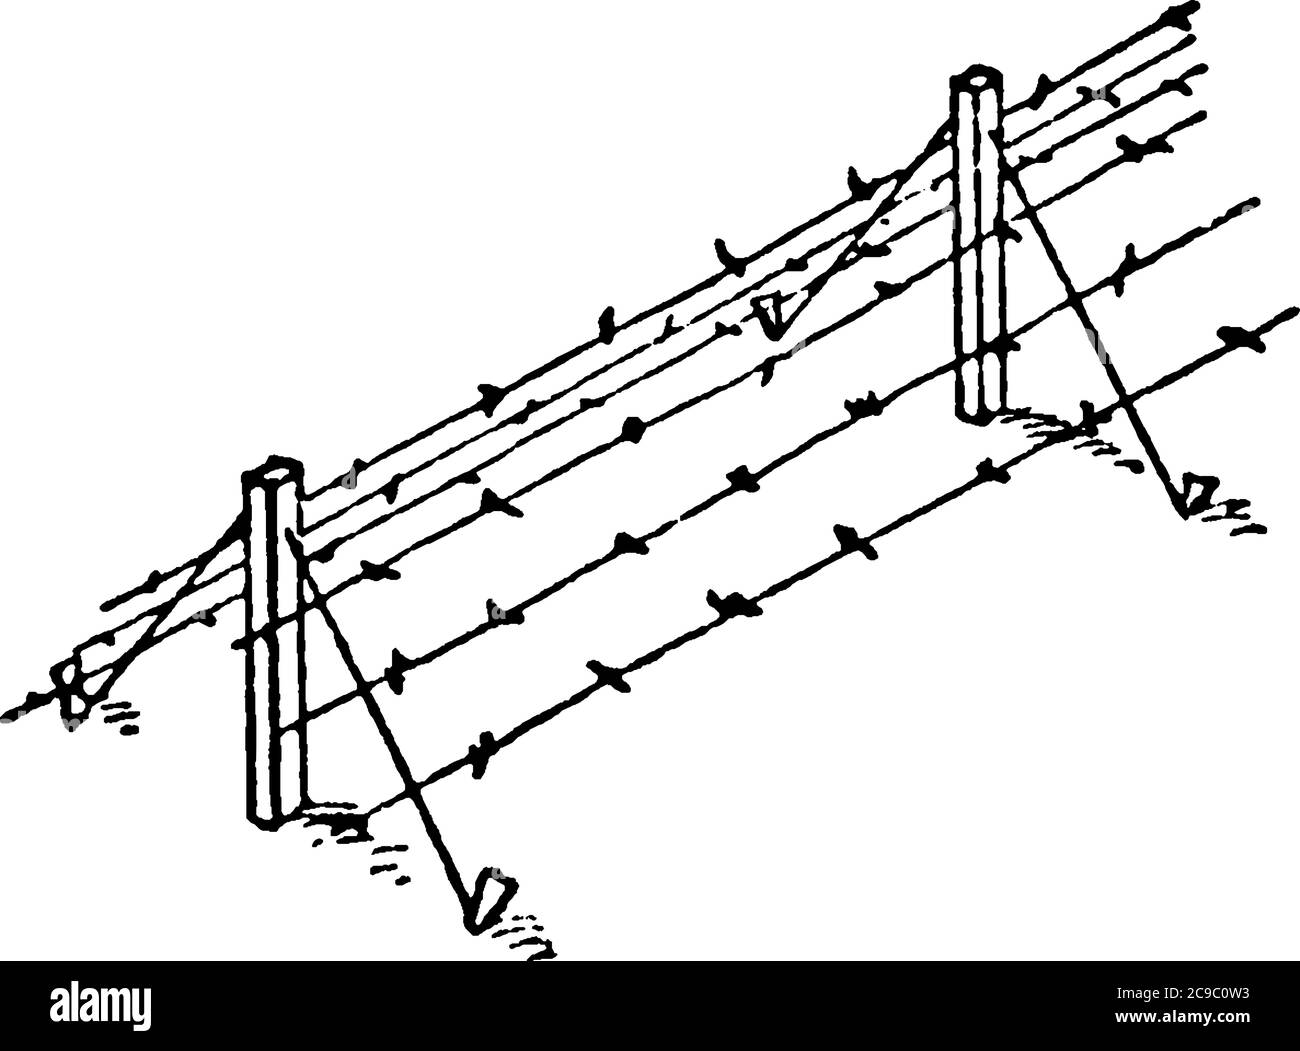 An ordinary barbed-wire fence is an obstacle if well swept by fire. It becomes more formidable if a ditch is dug on one or both sides to obstruct the Stock Vector